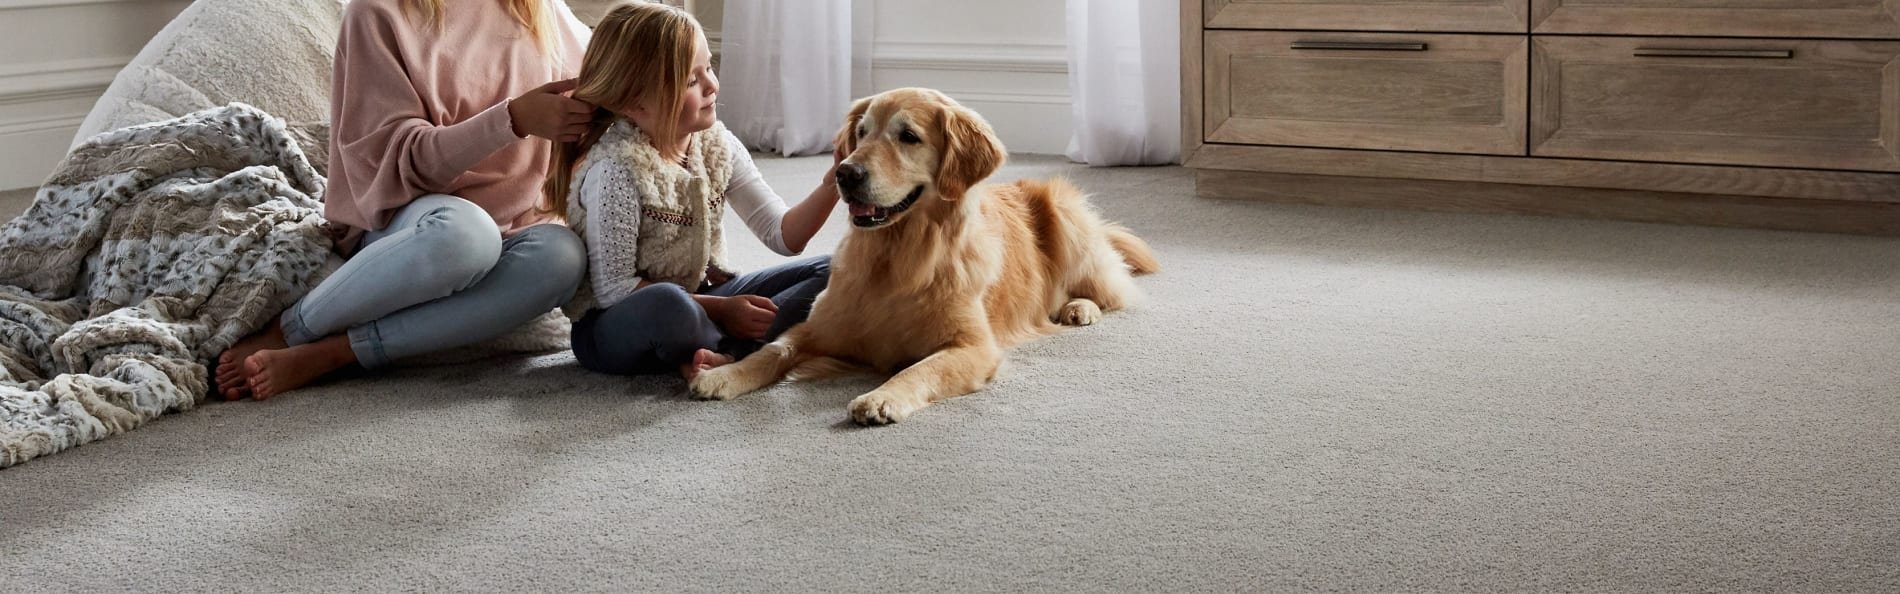 Mother and daughter sitting on carpeted floor with dog